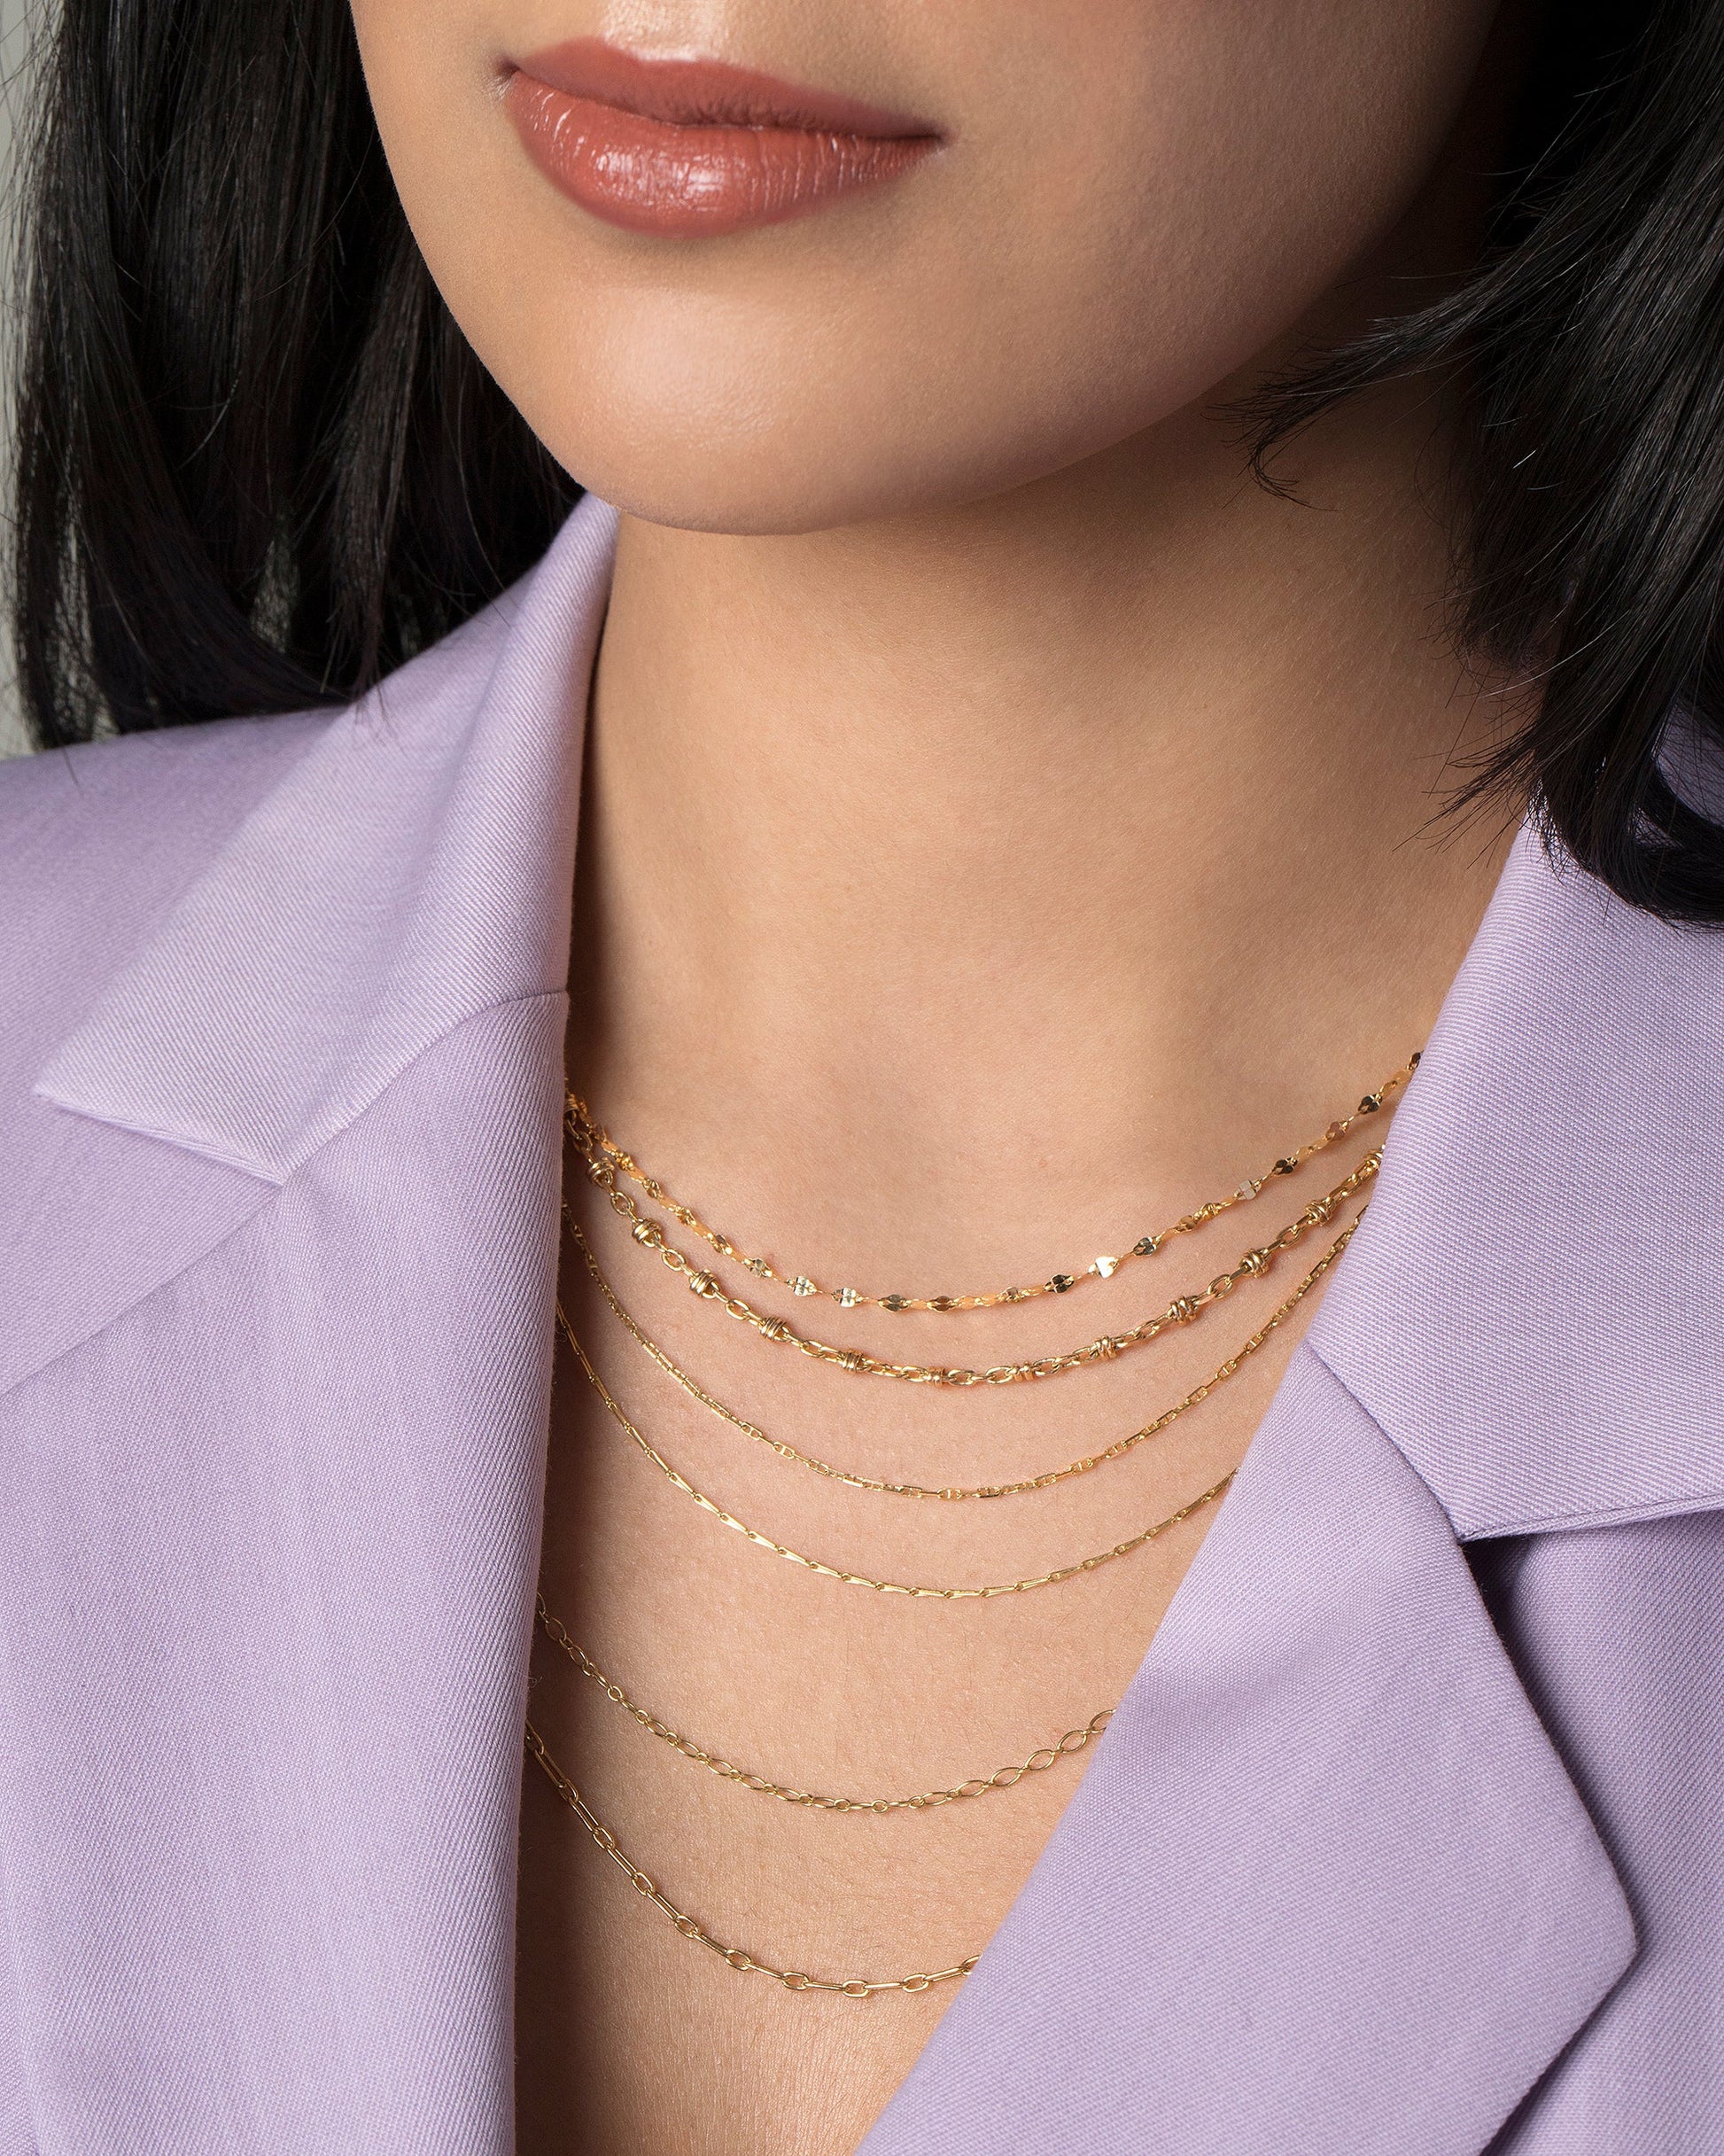 Abacus Chain Necklace on model.